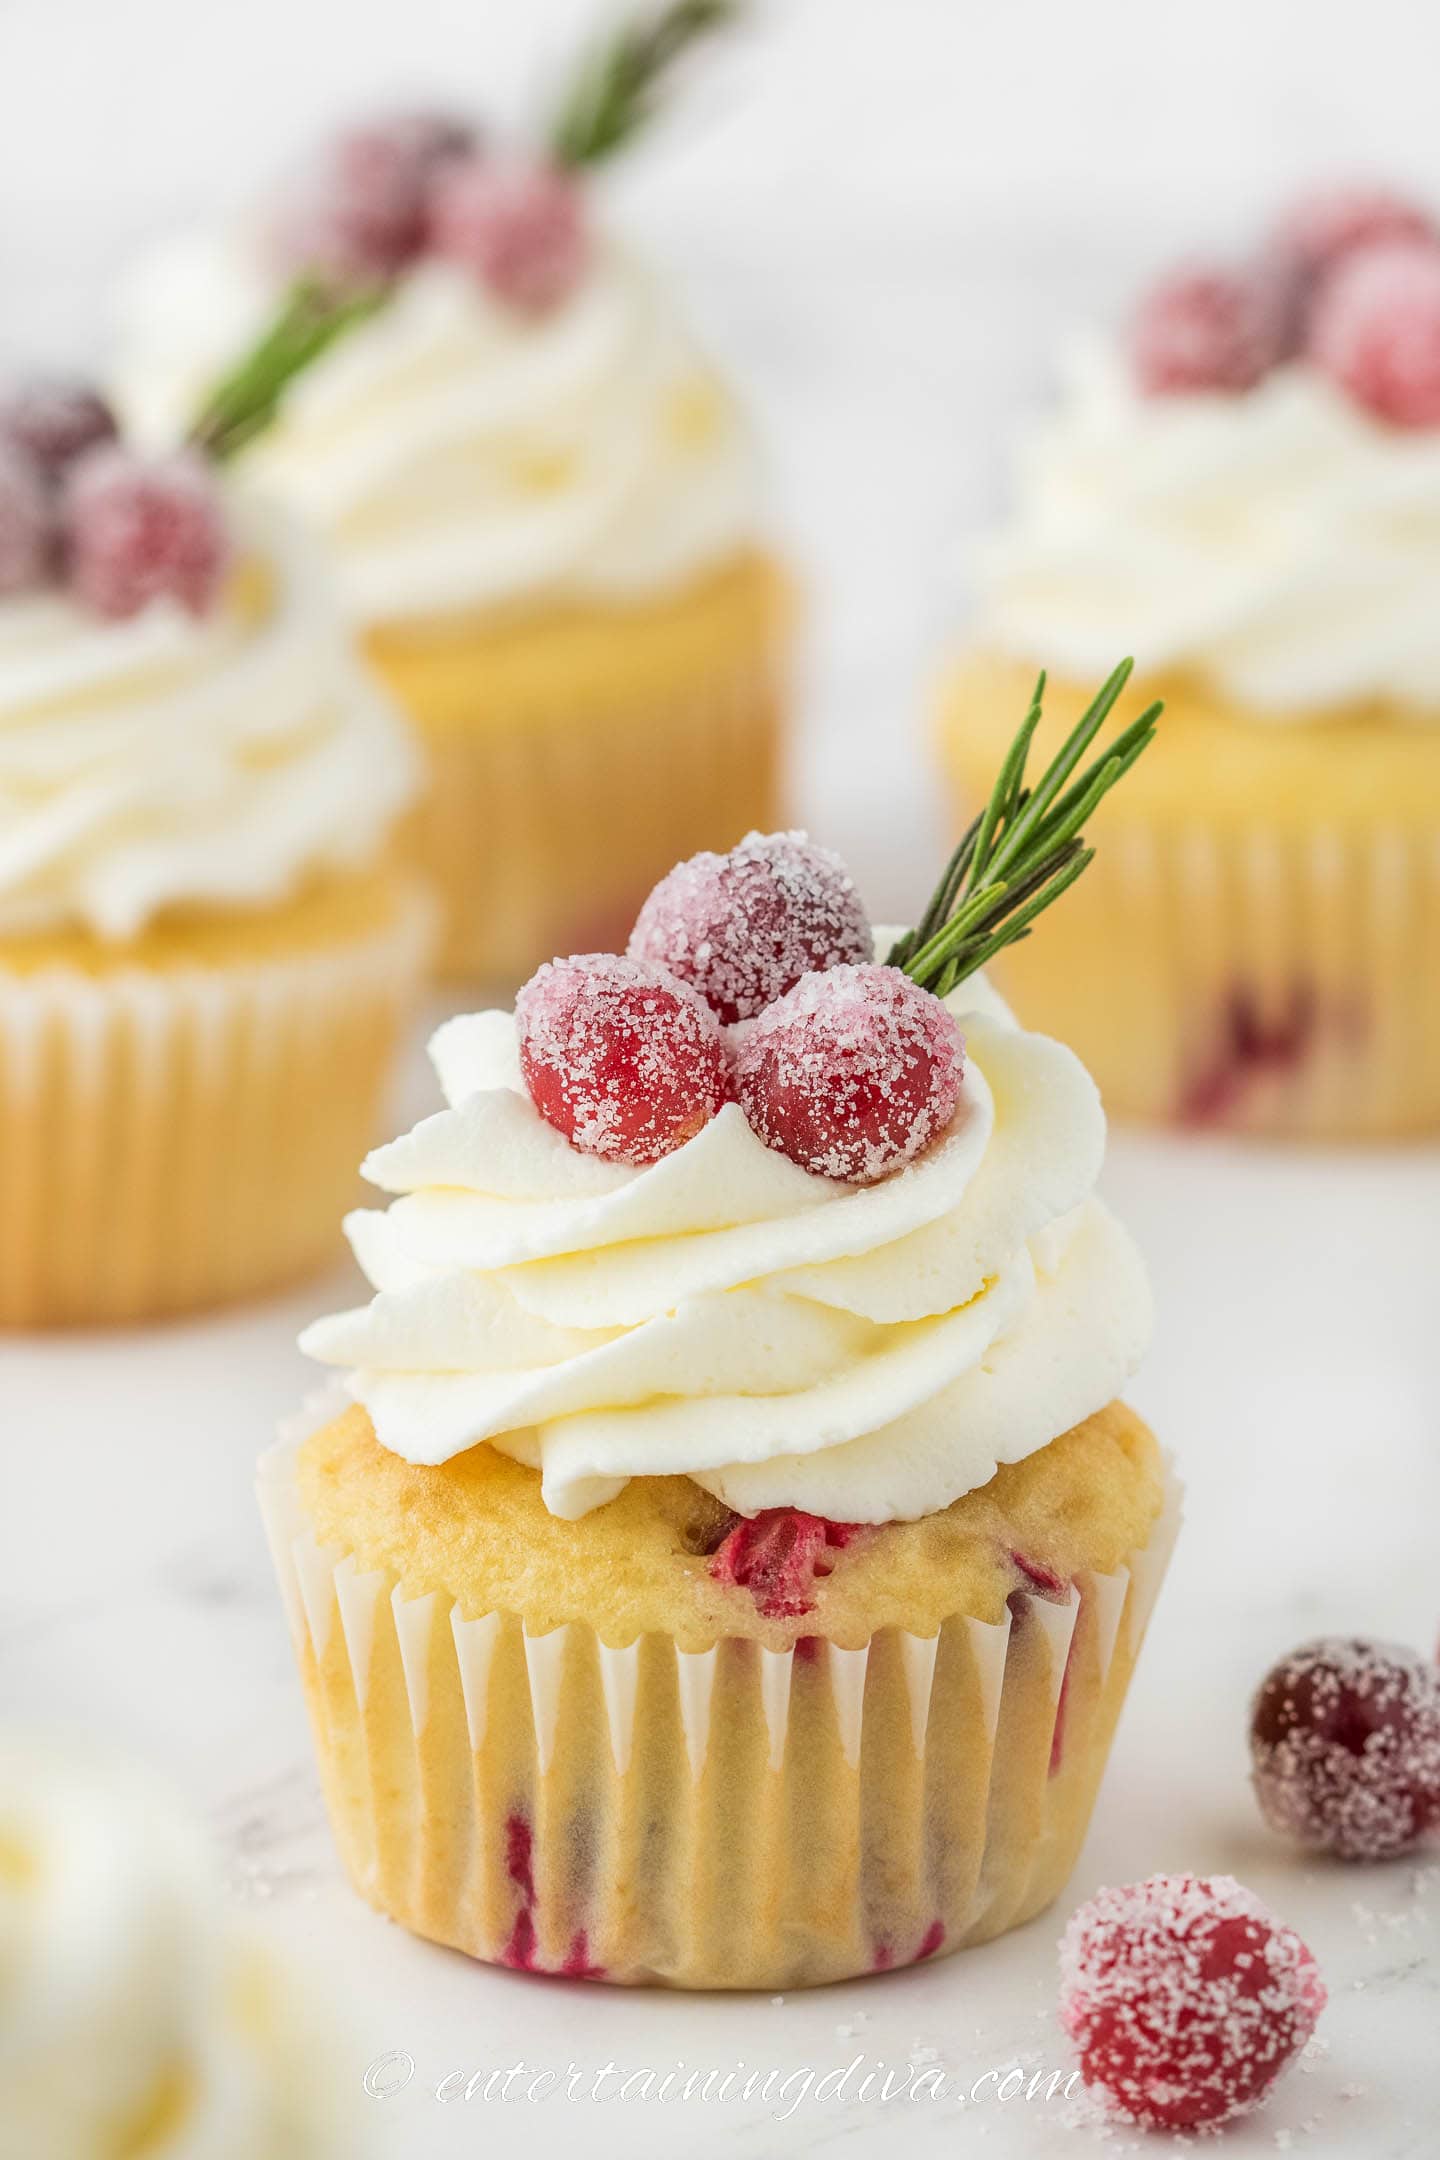 white chocolate cranberry cupcake with sugared cranberry garnish in front of other cupcakes